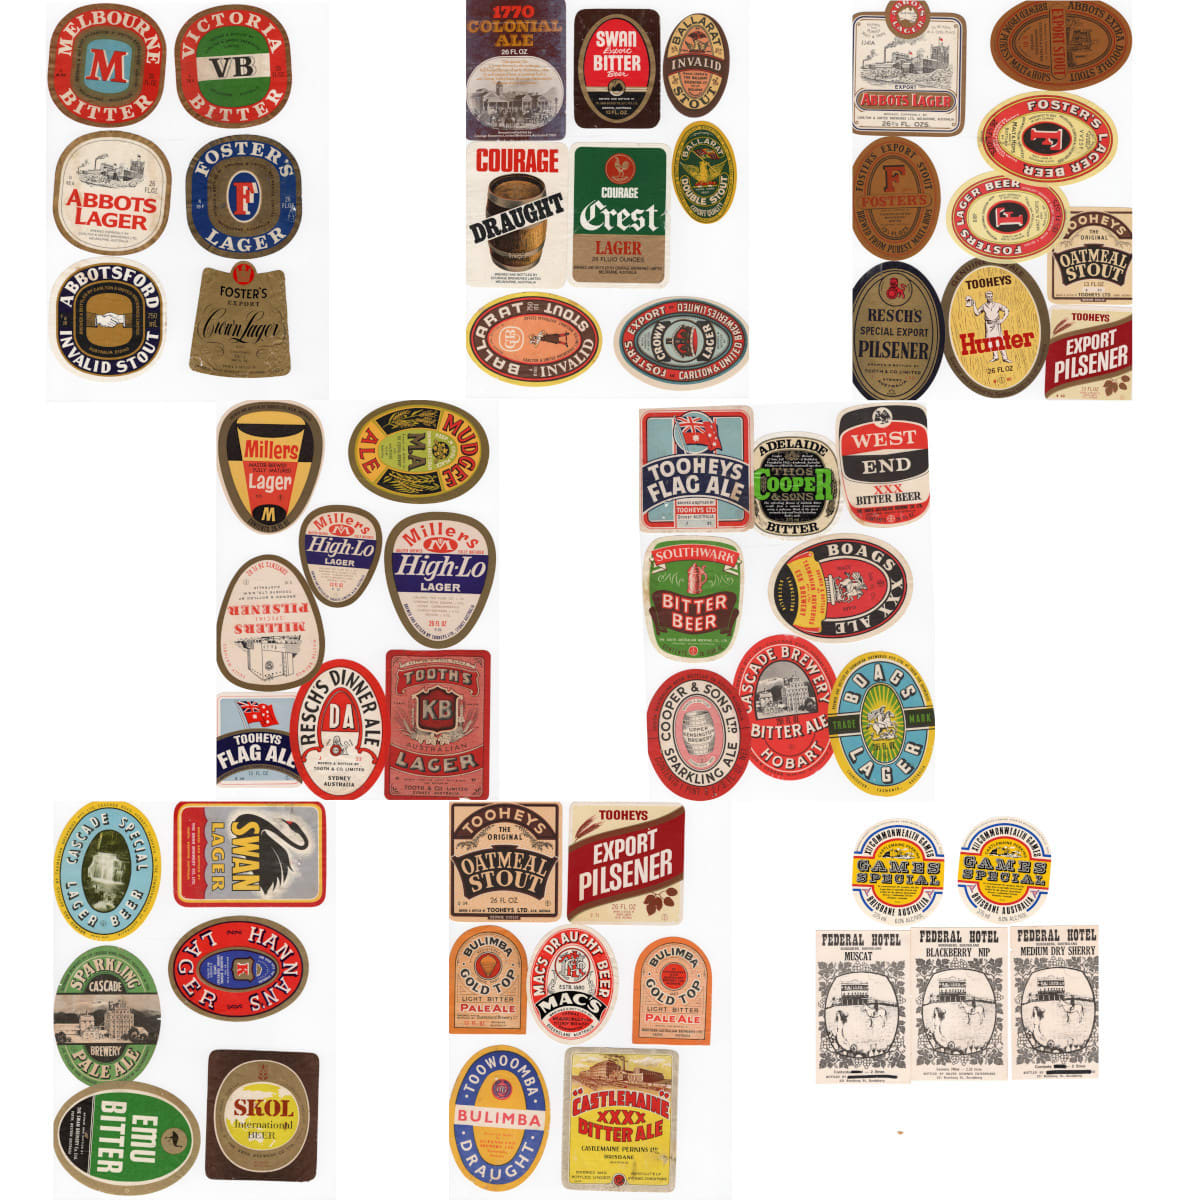 50 odd Australian Beer Labels: Pretty much from all states and large breweries plus 3 Federal Hotel Bundaberg labels.